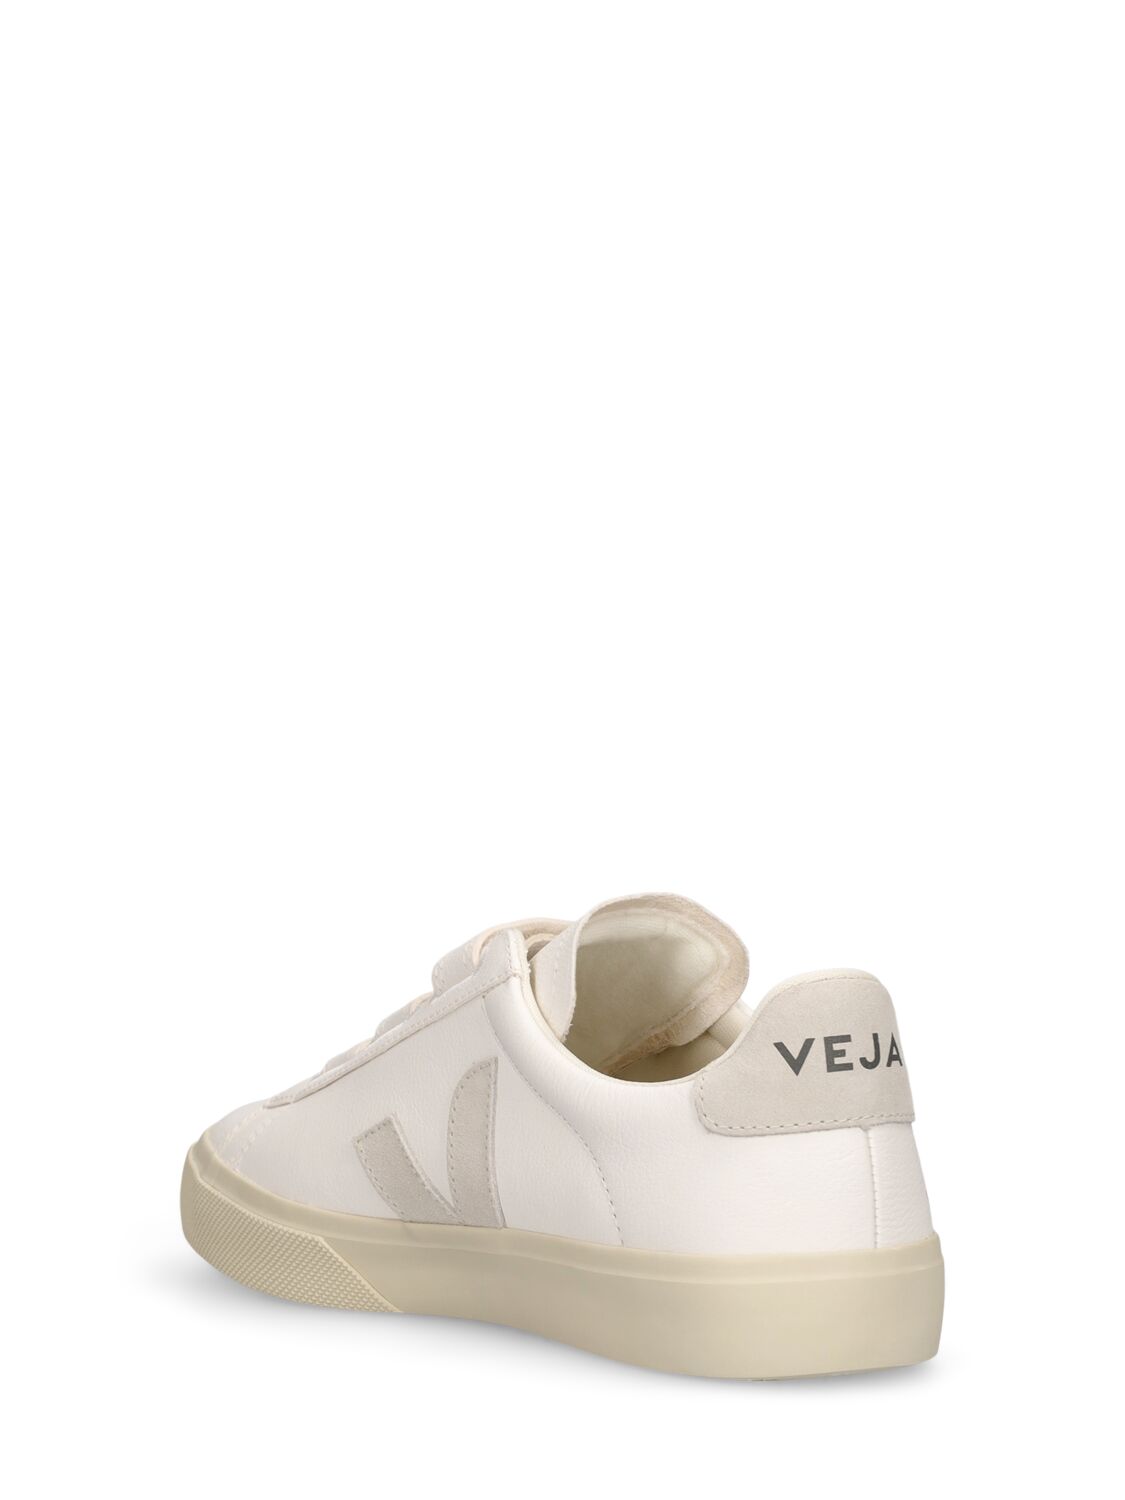 Shop Veja Recife Leather Sneakers In White